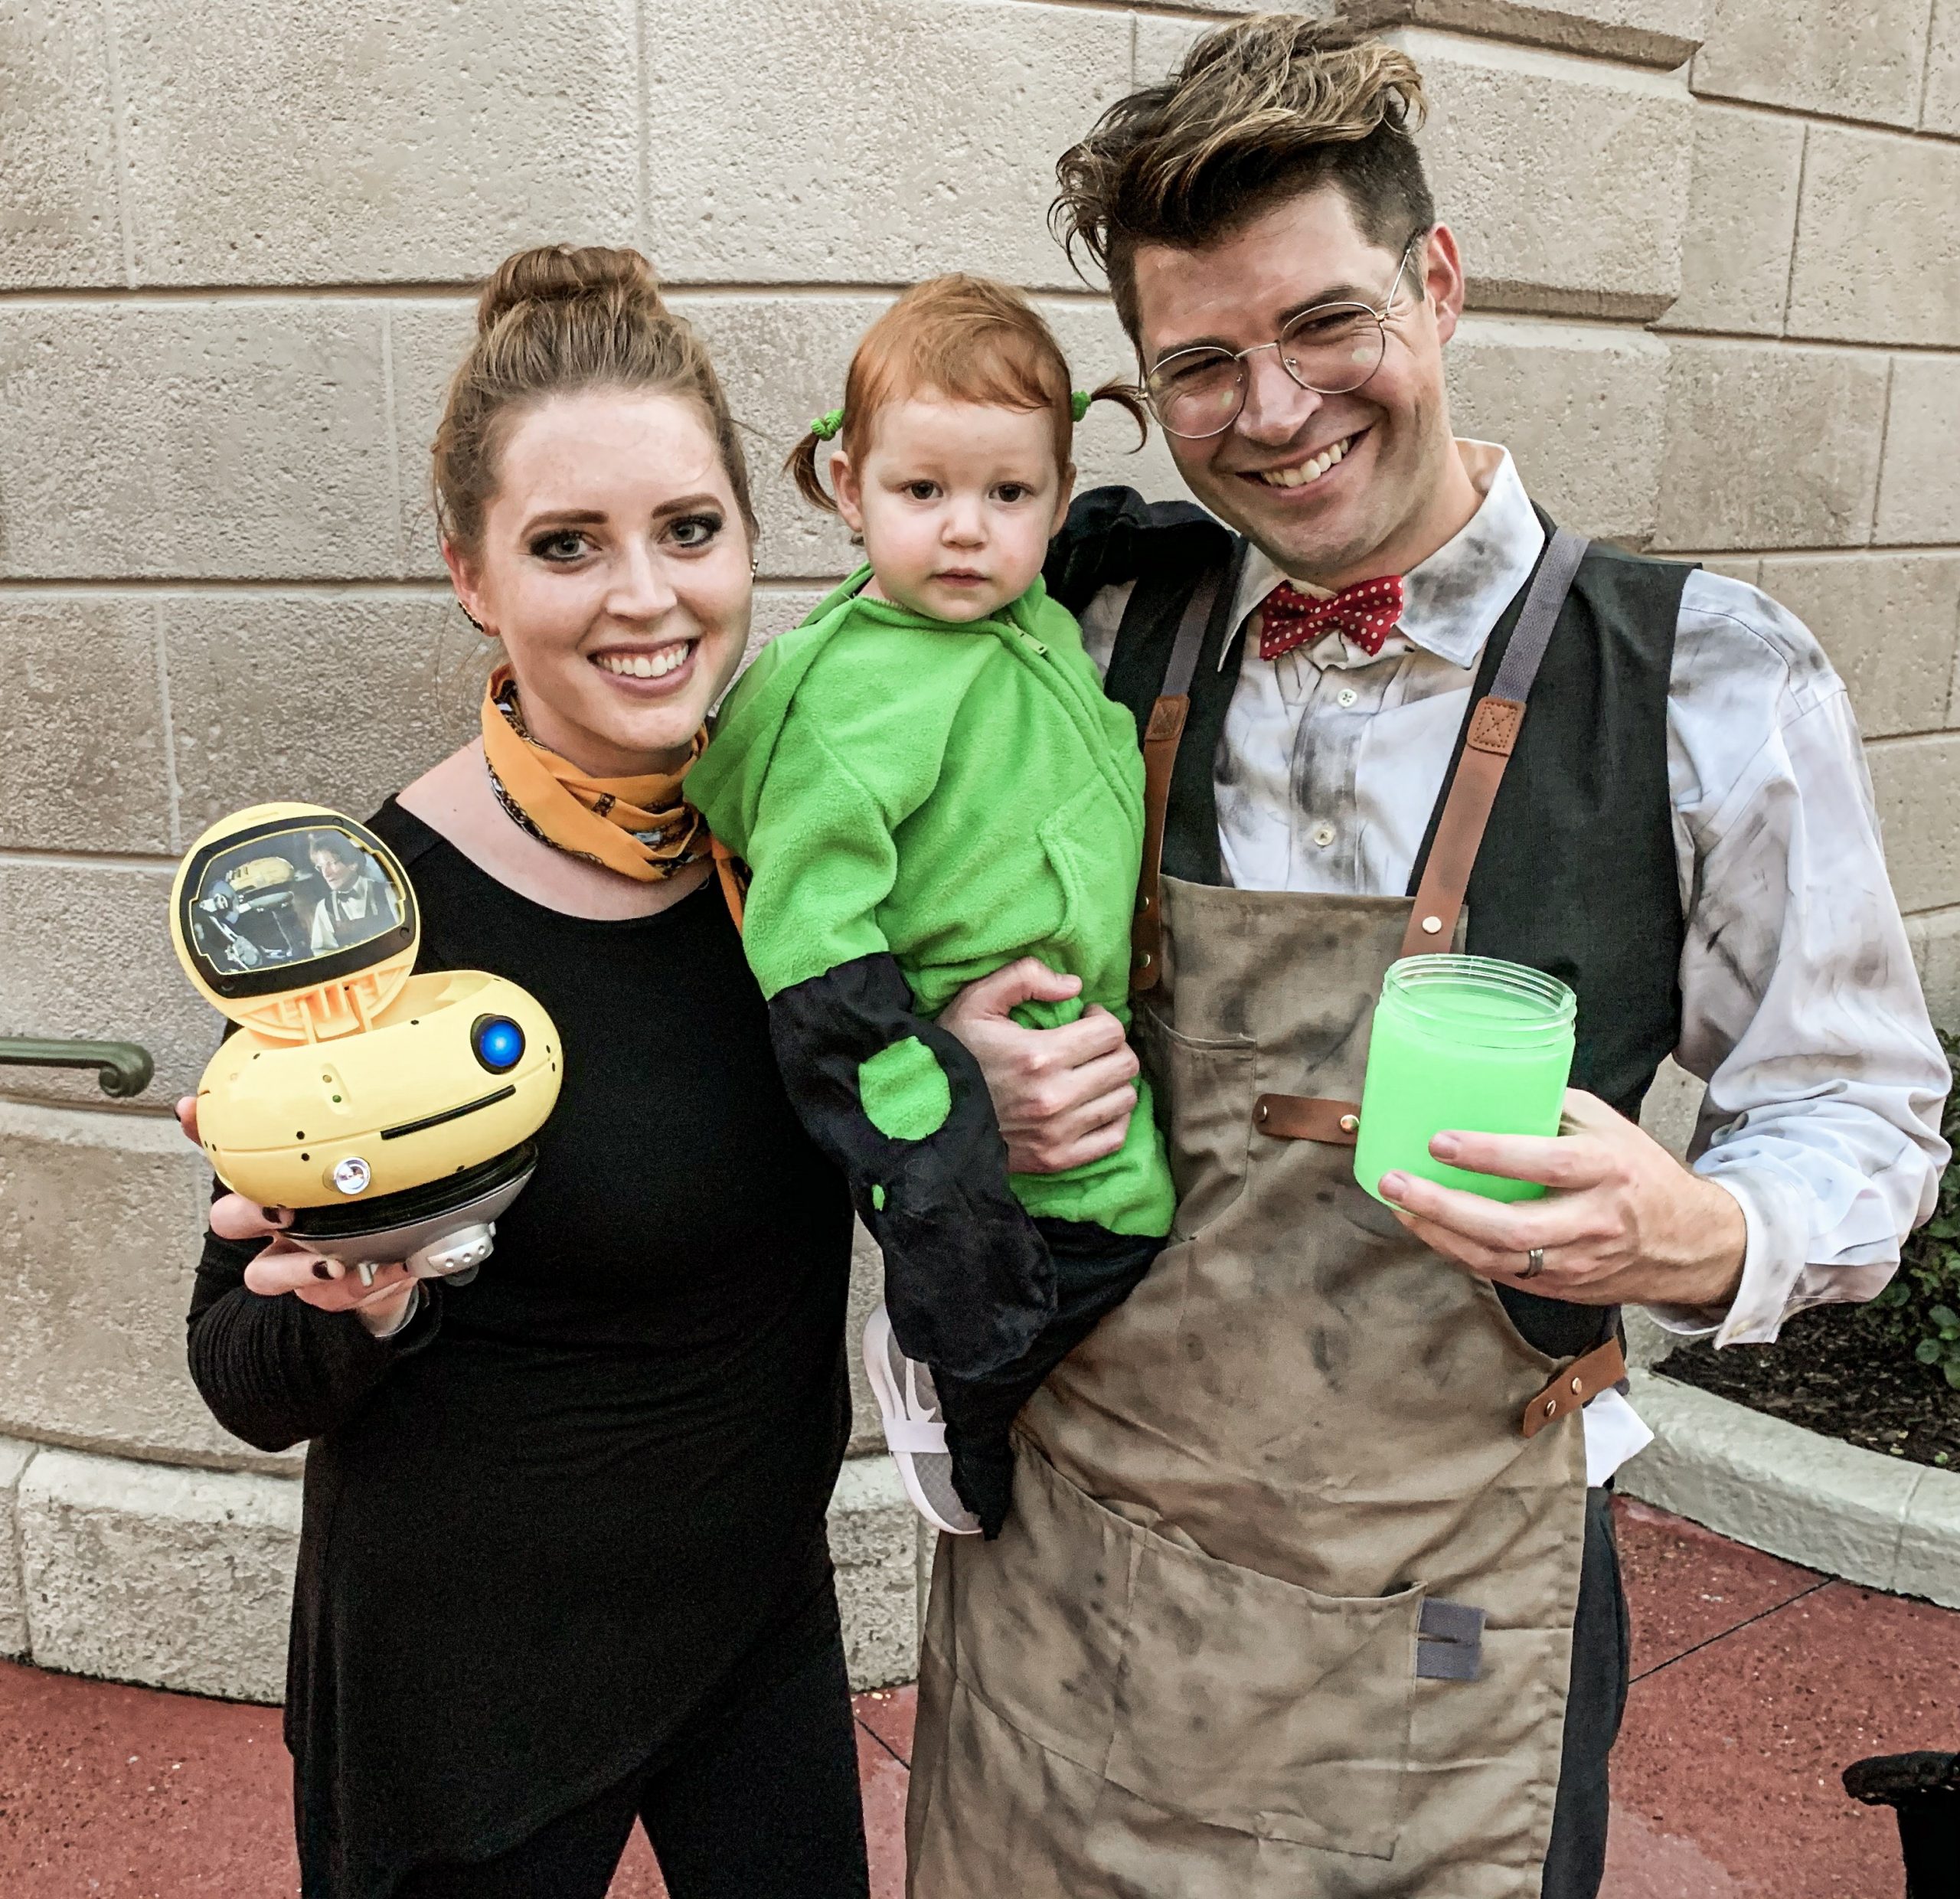 mom and dad dressed as characters from WALL-E and girl in neon green